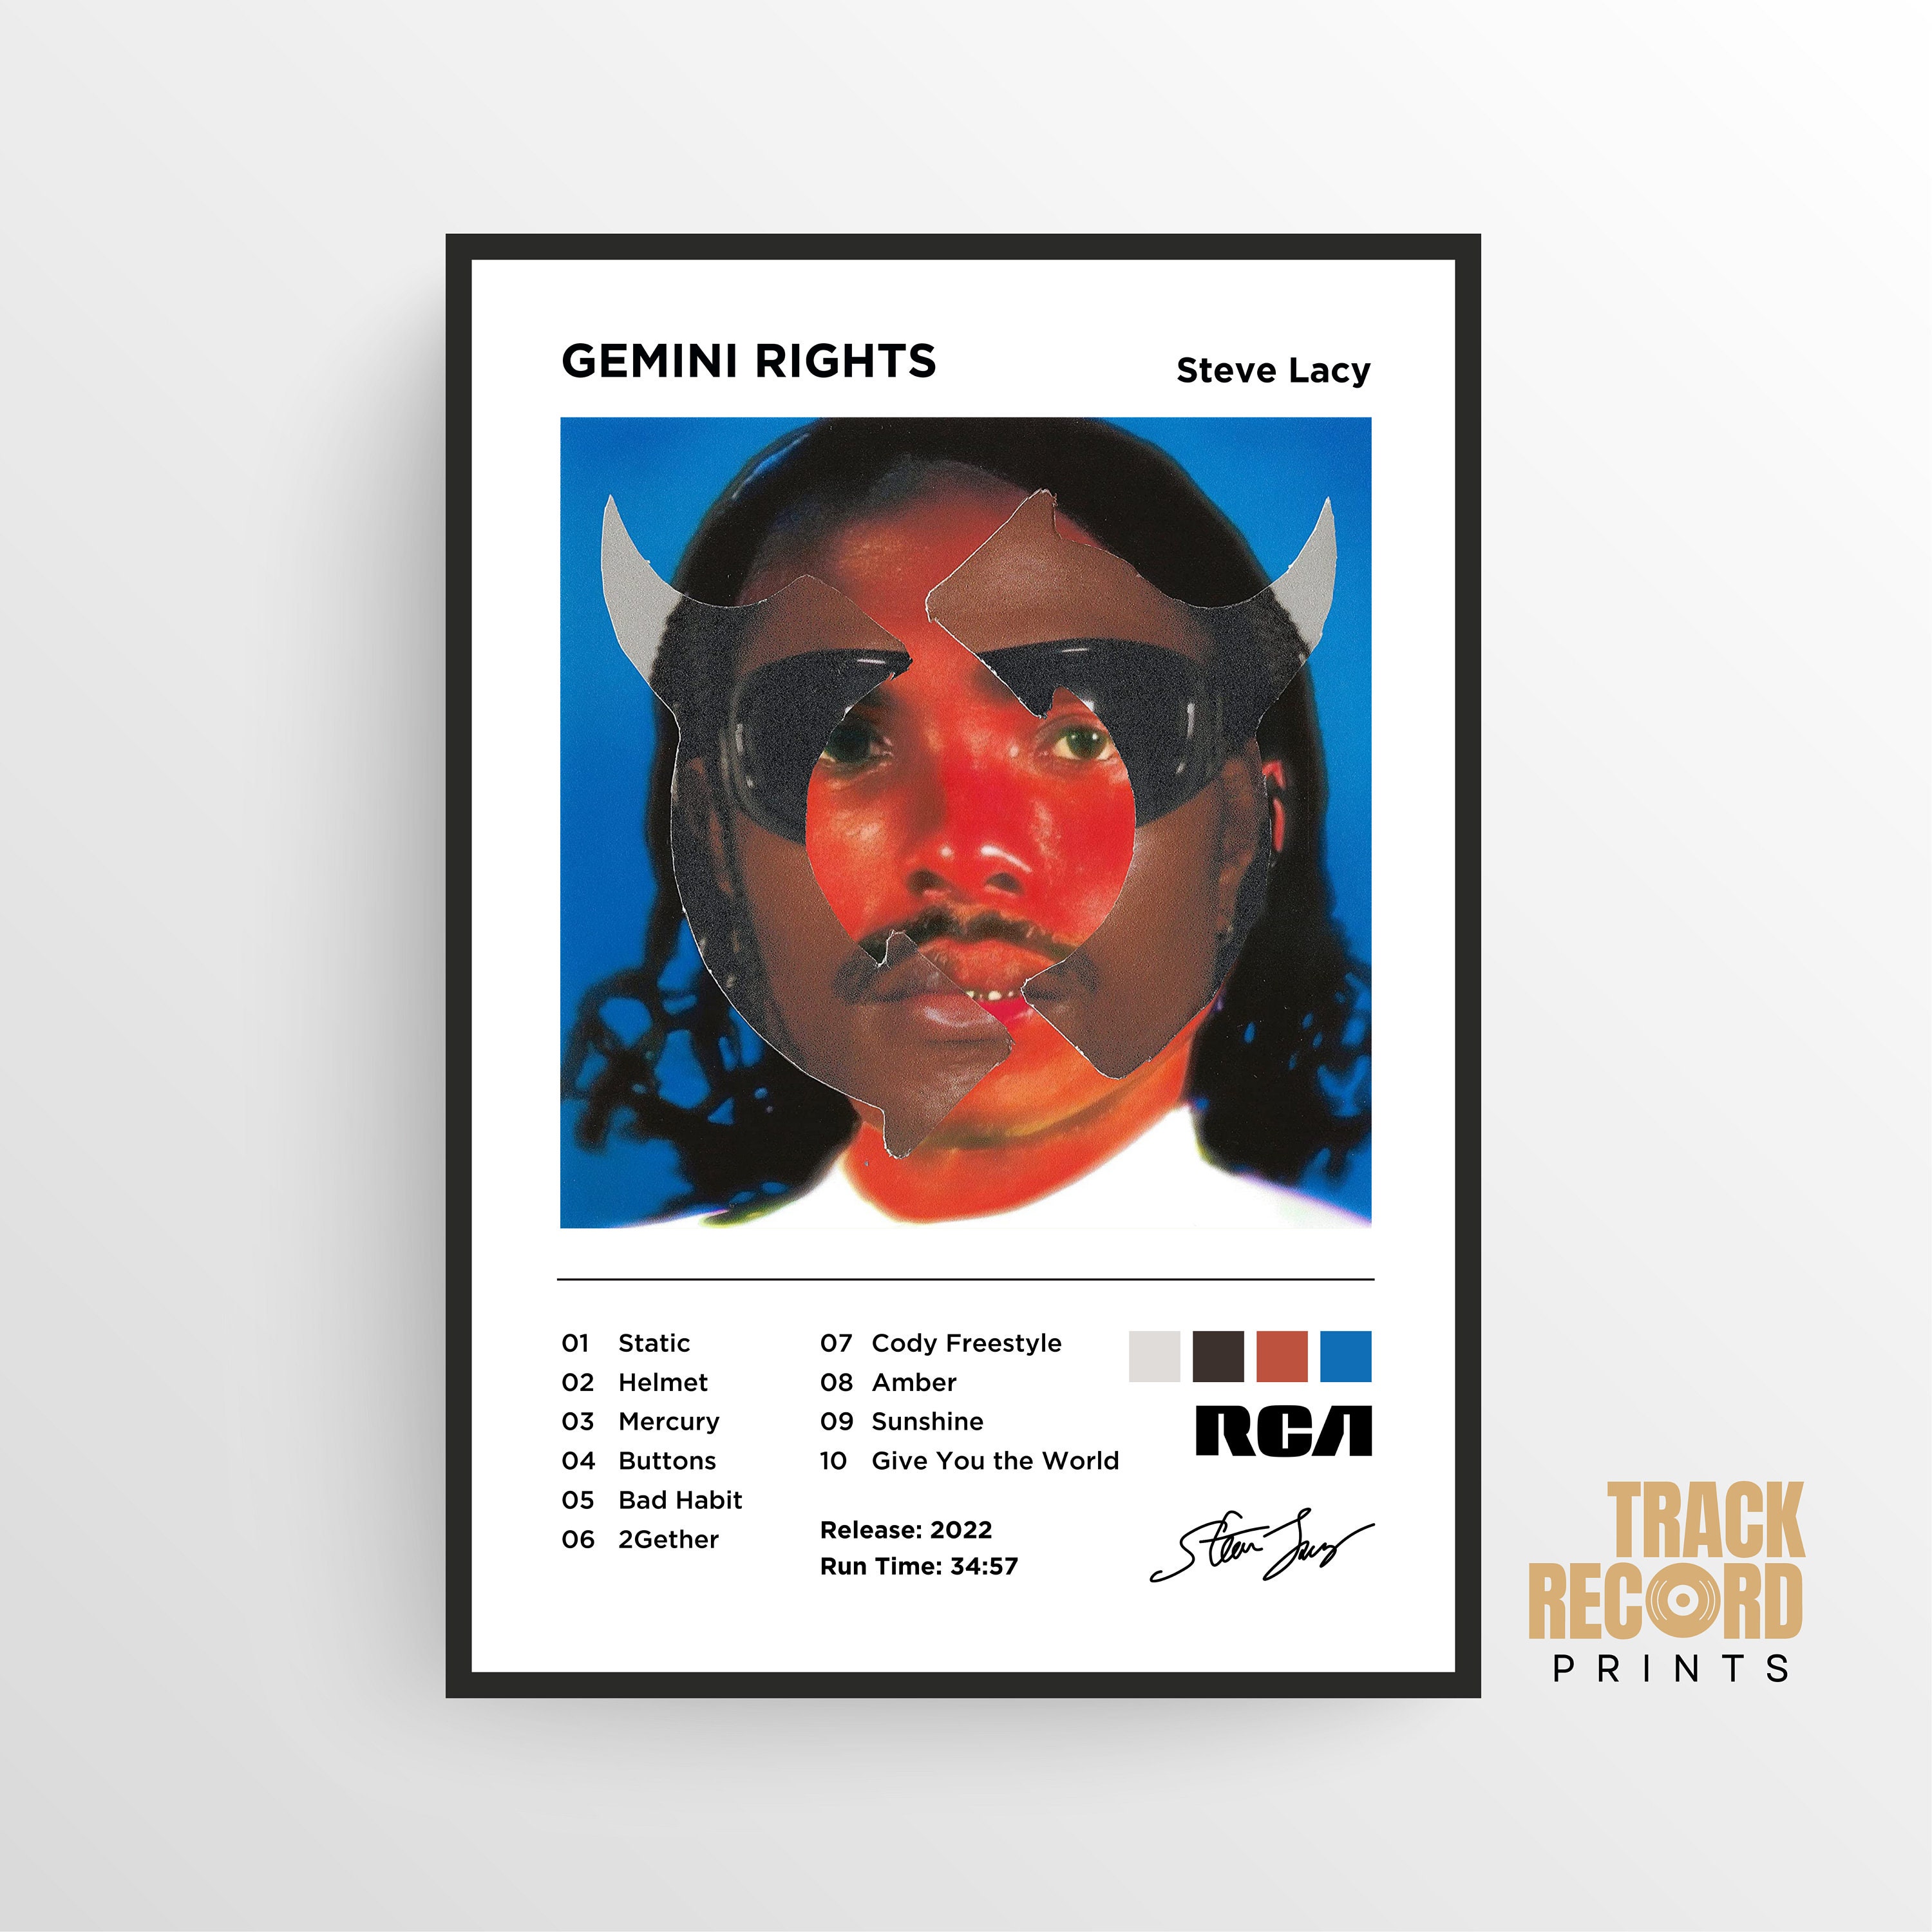 Steve Lacy Gemini Rights Album Cover Poster Print High-quality Art R&B Funk  Psychedelia Music Gift 